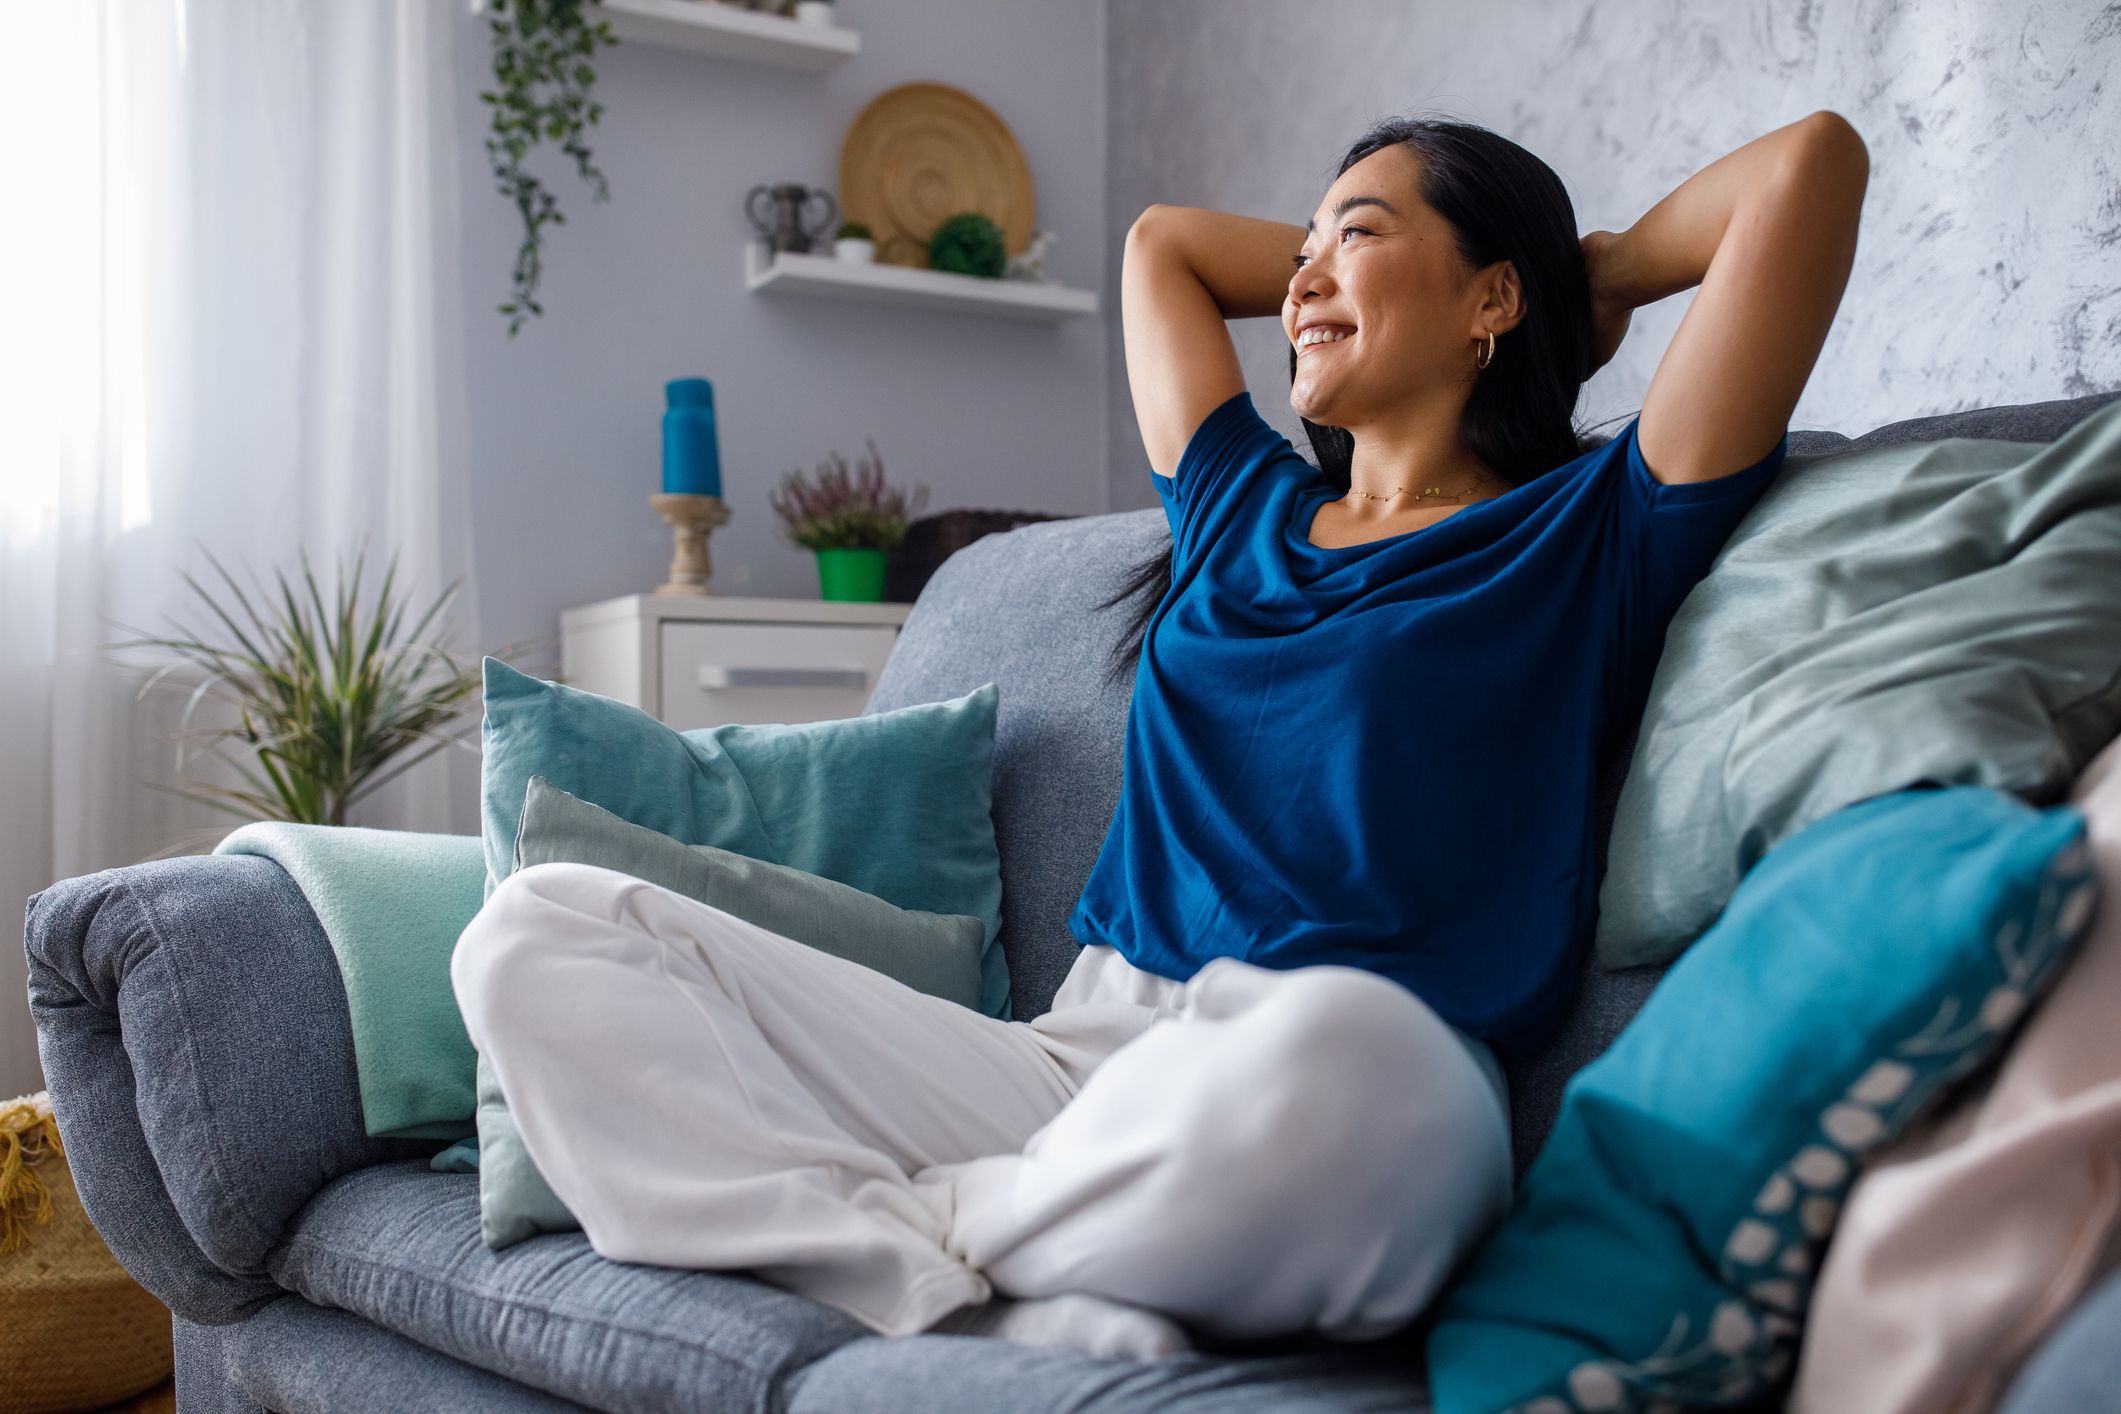 Woman relaxing on her couch practicing self-care